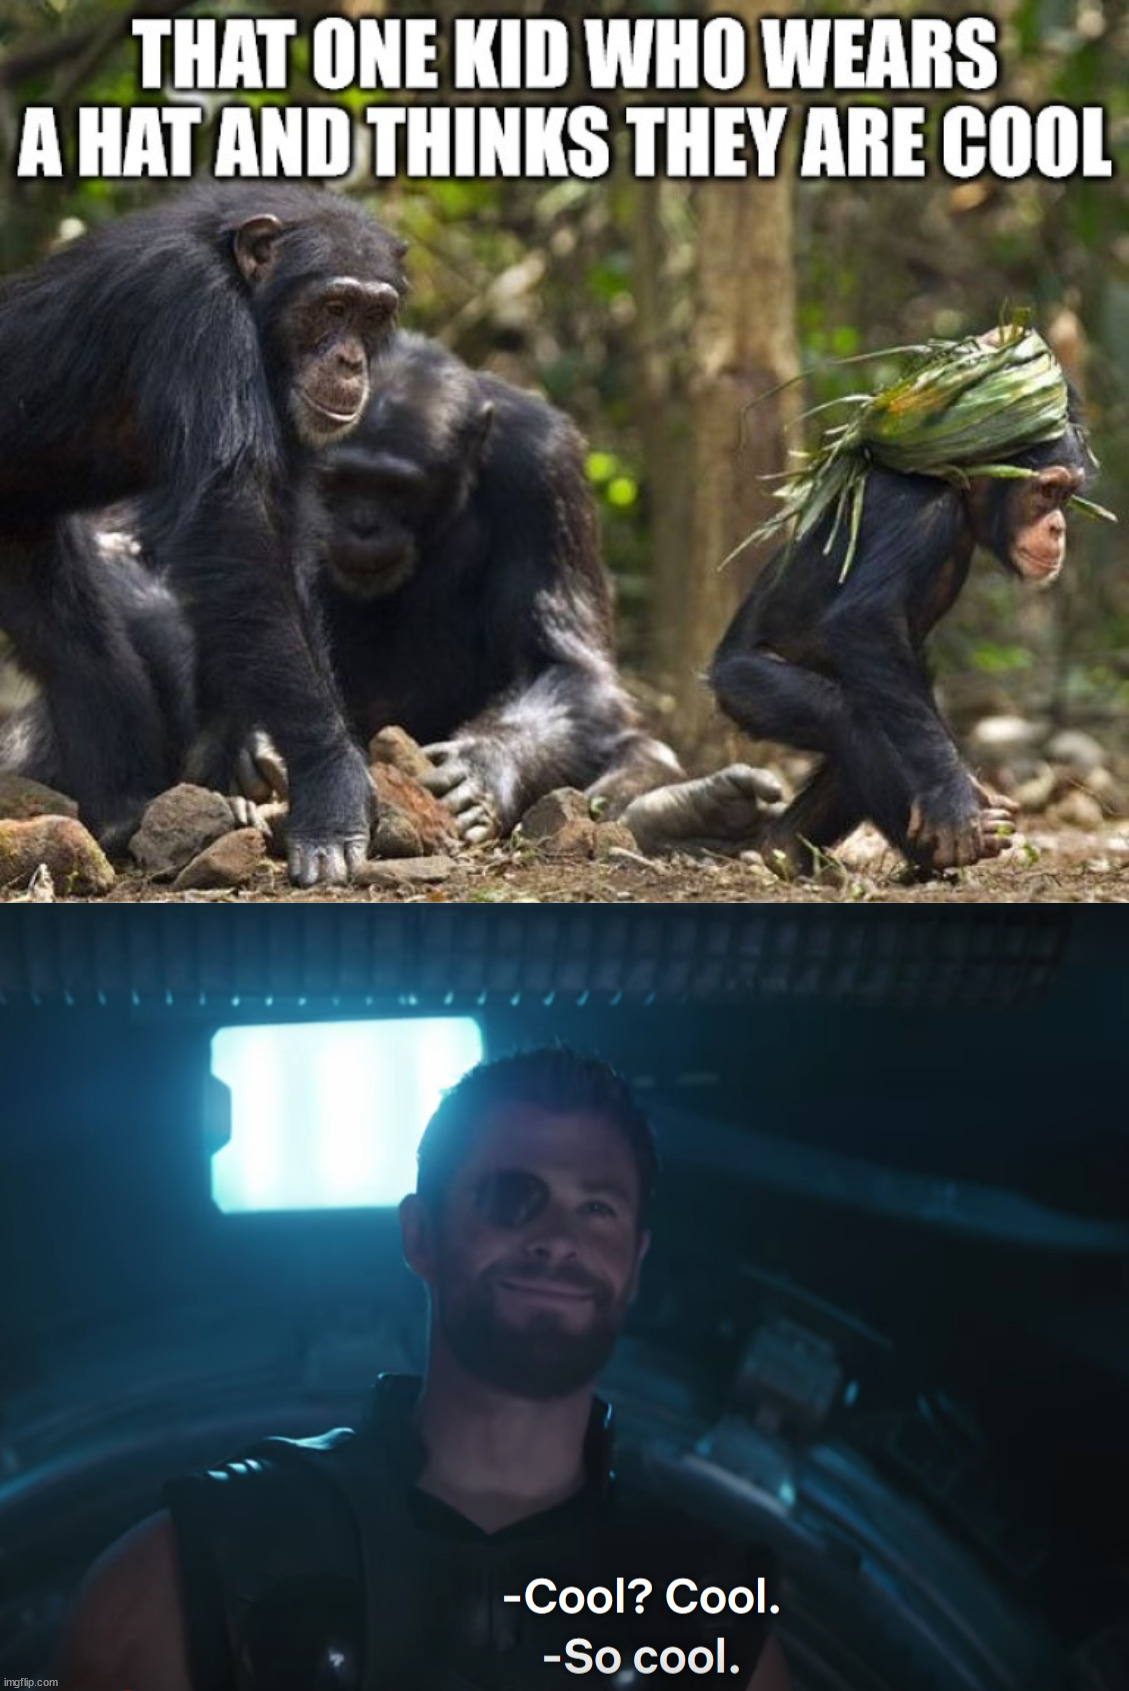 Trying to look cool. | image tagged in thor so cool,monkeys,hats | made w/ Imgflip meme maker